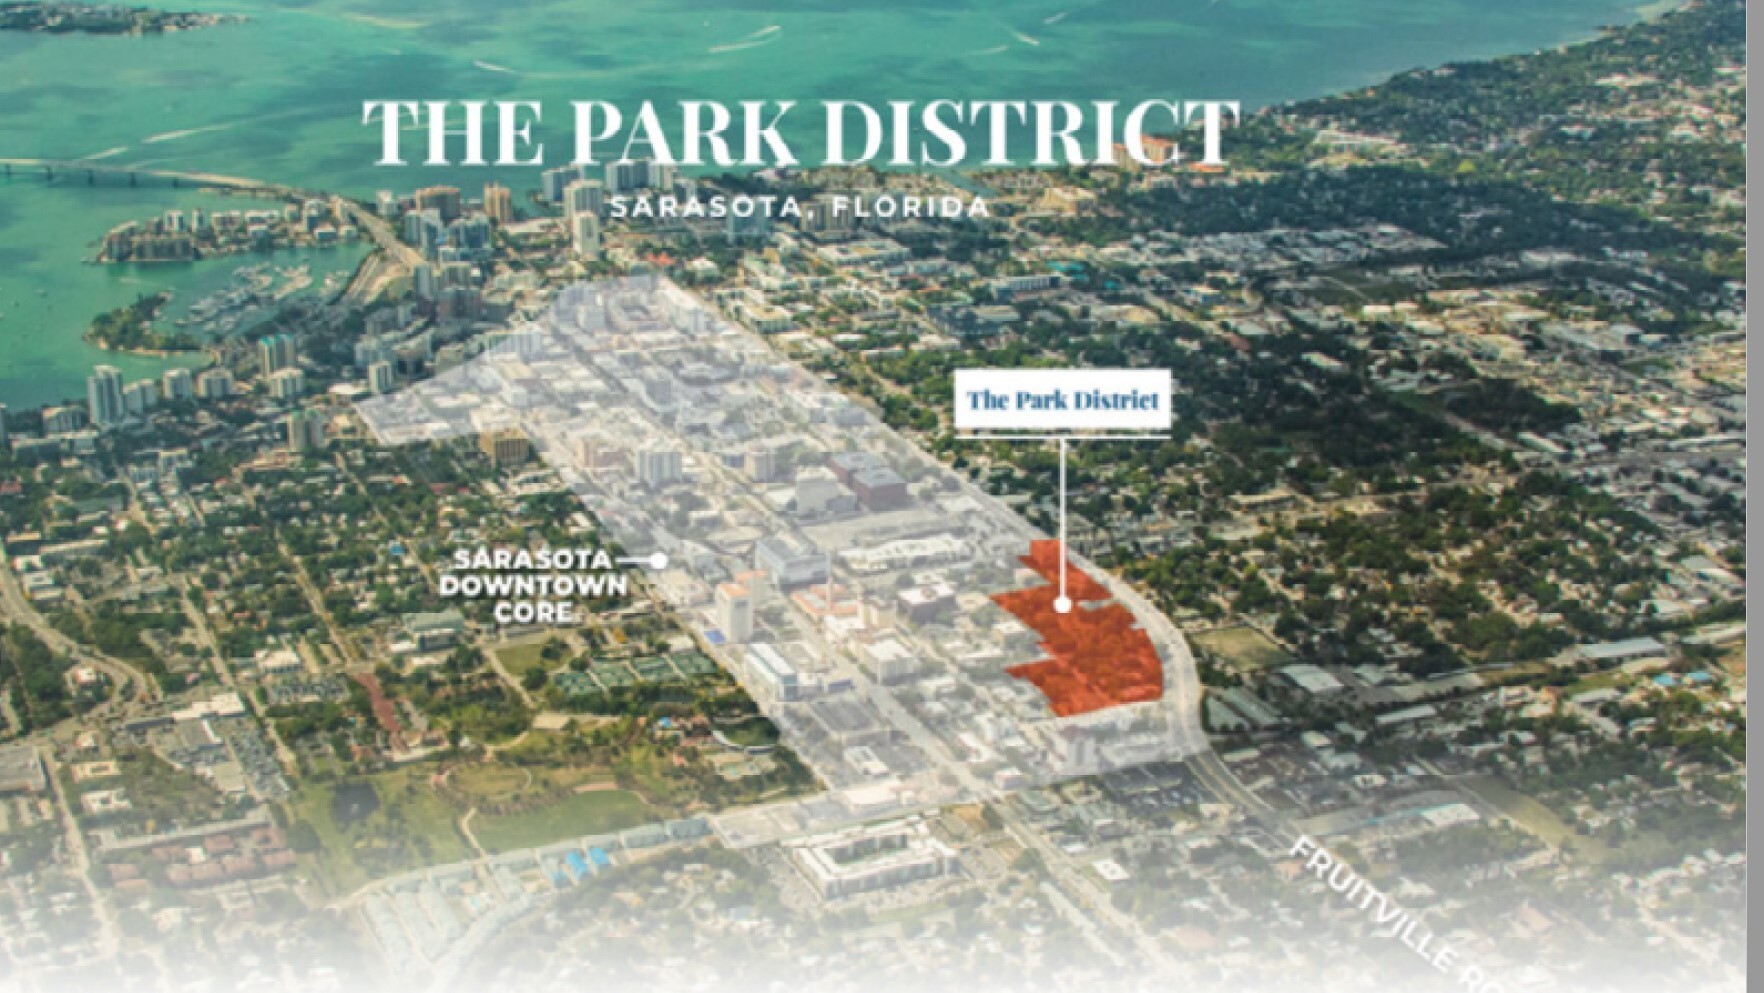 Park District is being spearheaded by the Atlanta multifamily development firm Brook Farm Group which has bought nearly 9 acres in downtown Sarasota and plans to build a mixed-use development on the sites. (Courtesy image)